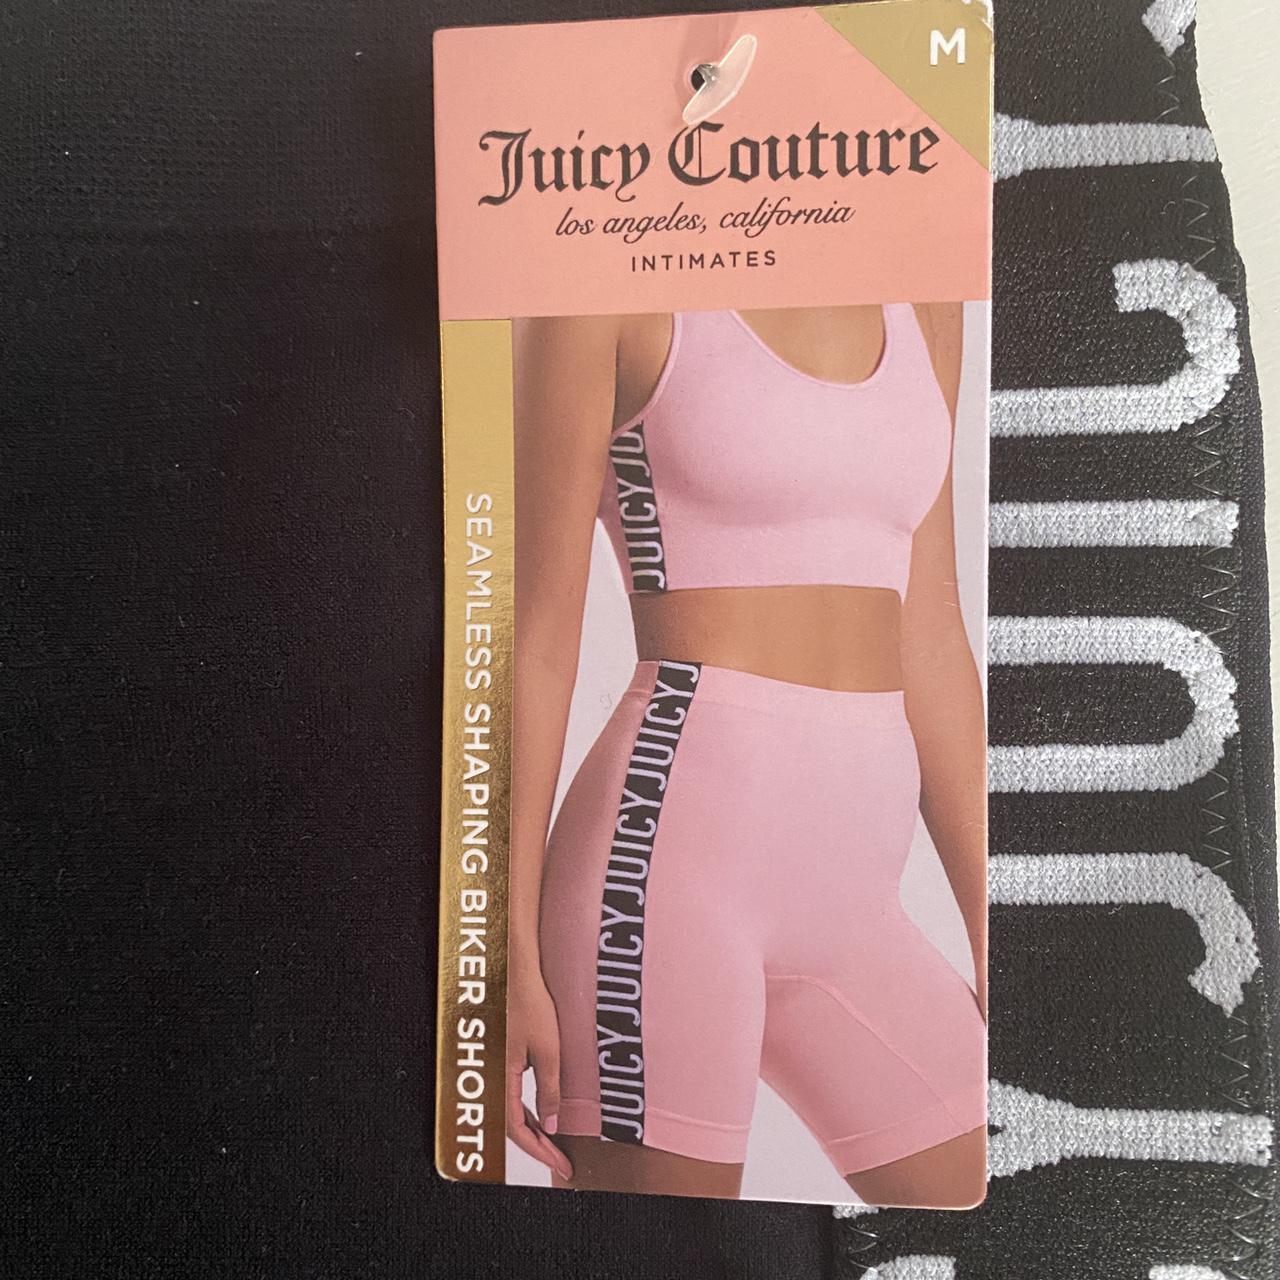 Juicy Couture Intimates Seamless Shaping Pink Shorts